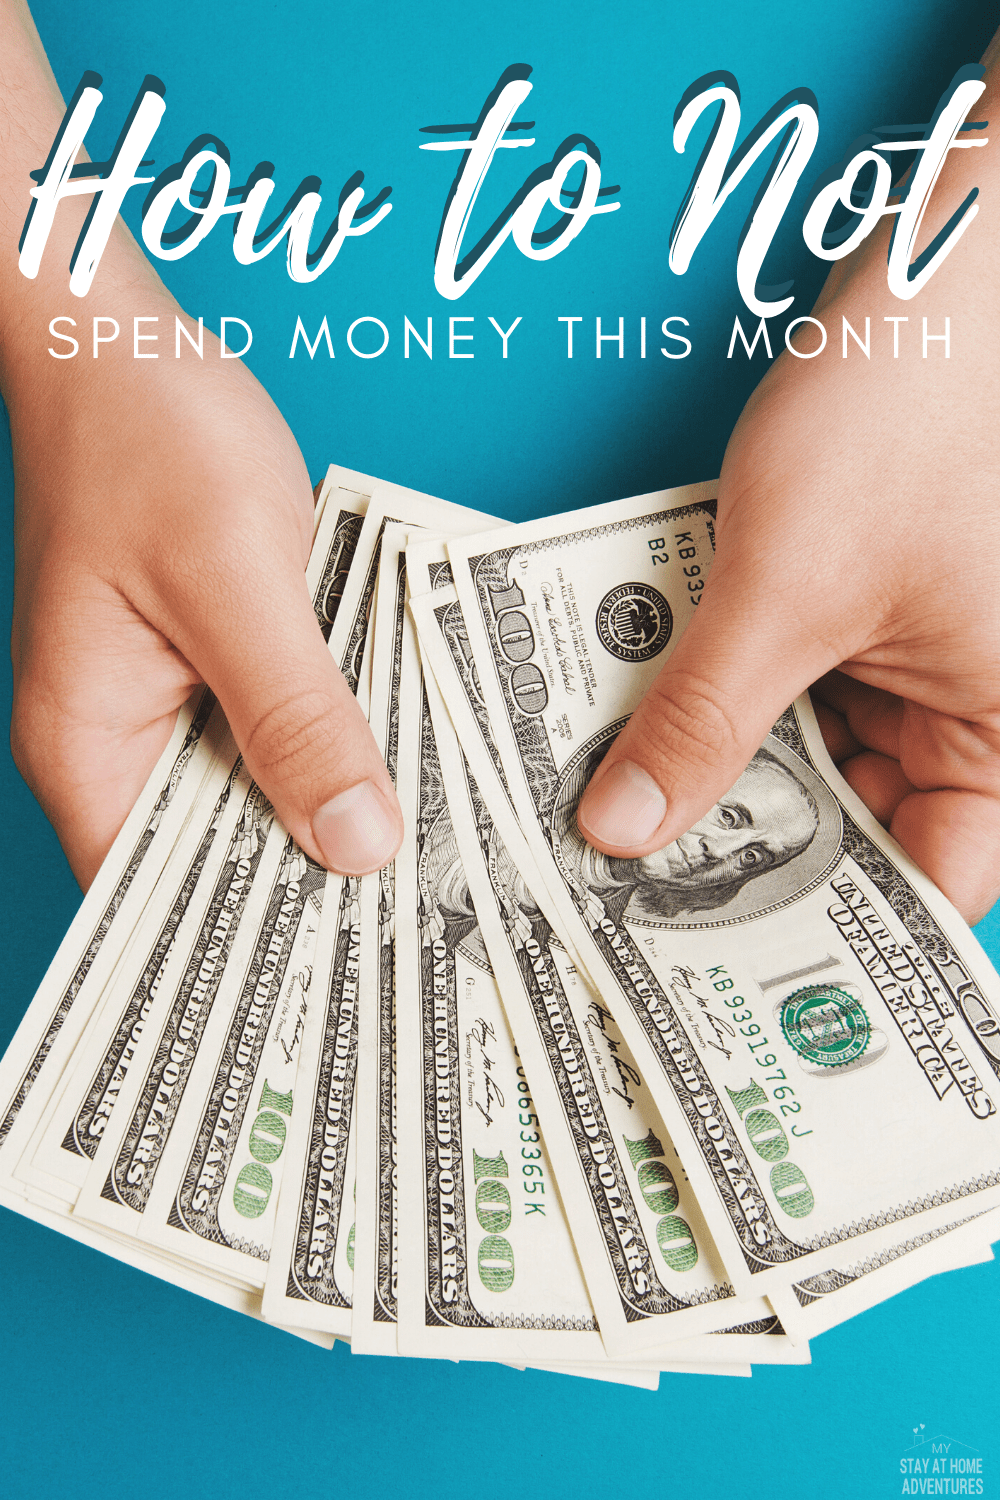 Learn 8 tips to help you not spend money this month and how they helped us save thousands. Start following them and start seeing results! via @mystayathome